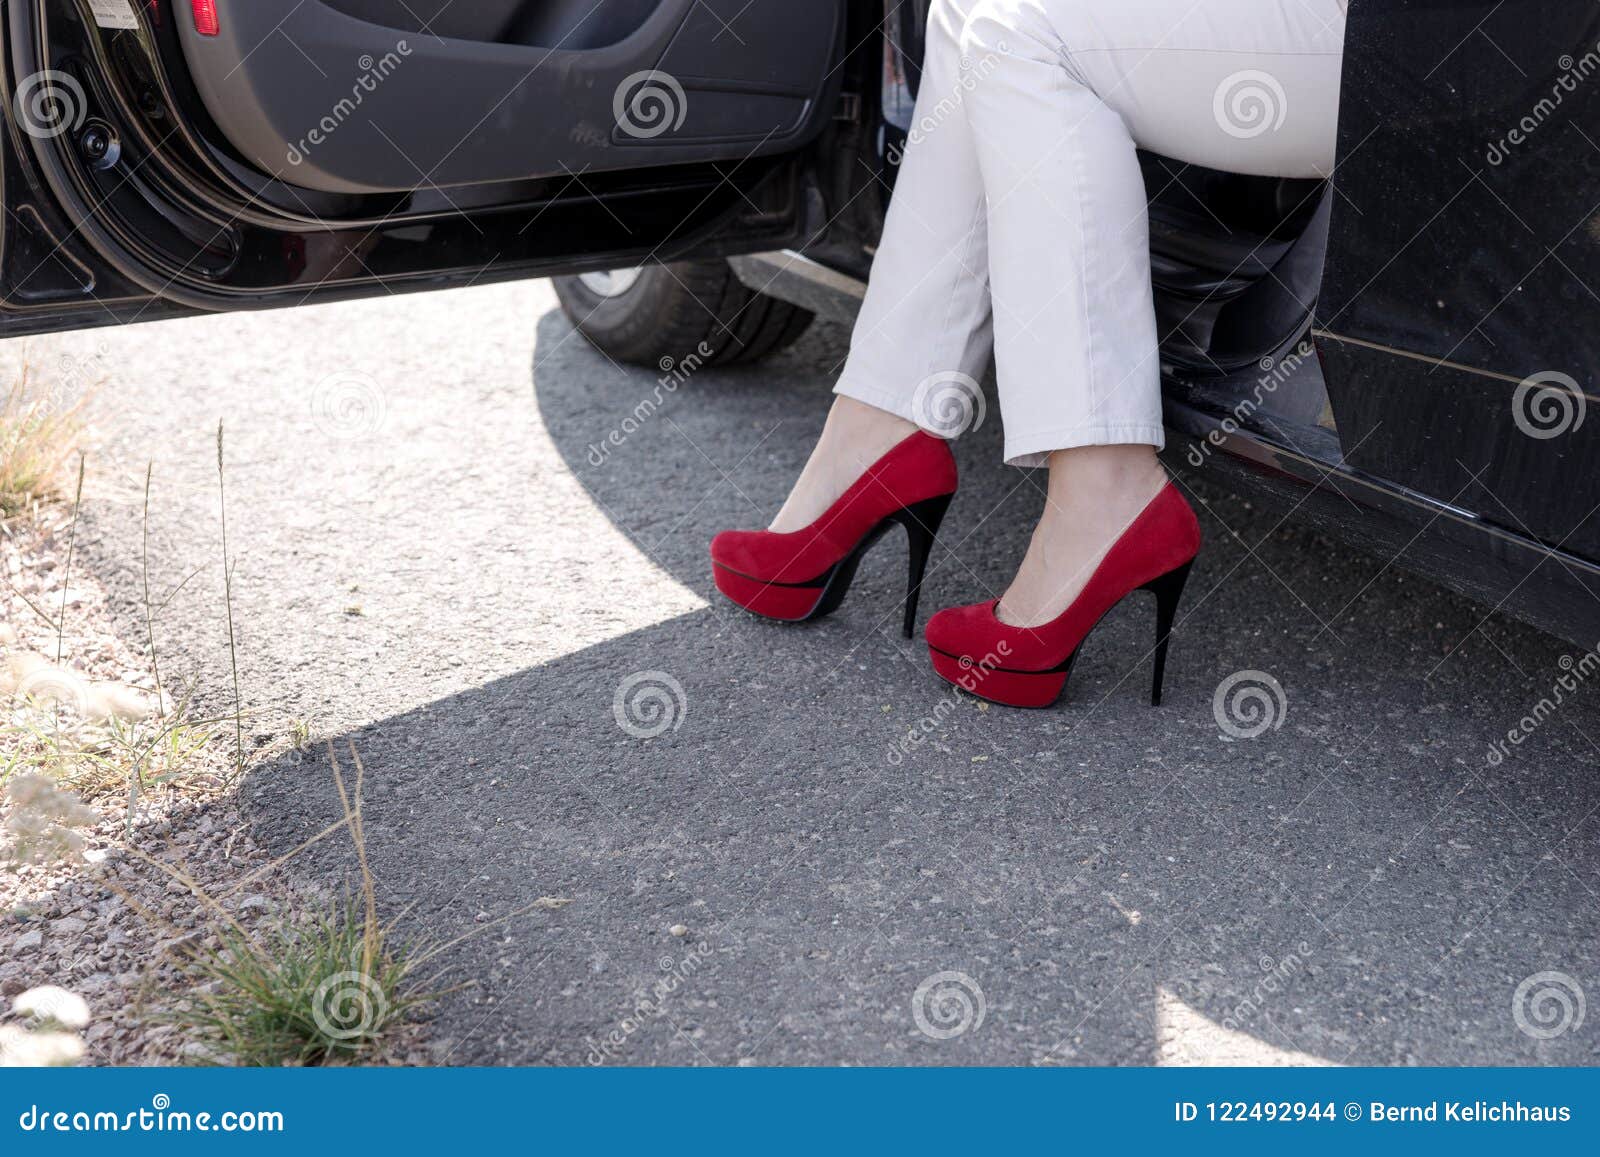 Woman Gets Out of the Car. Legs with Red High Heeled Shoes Stock Photo ...